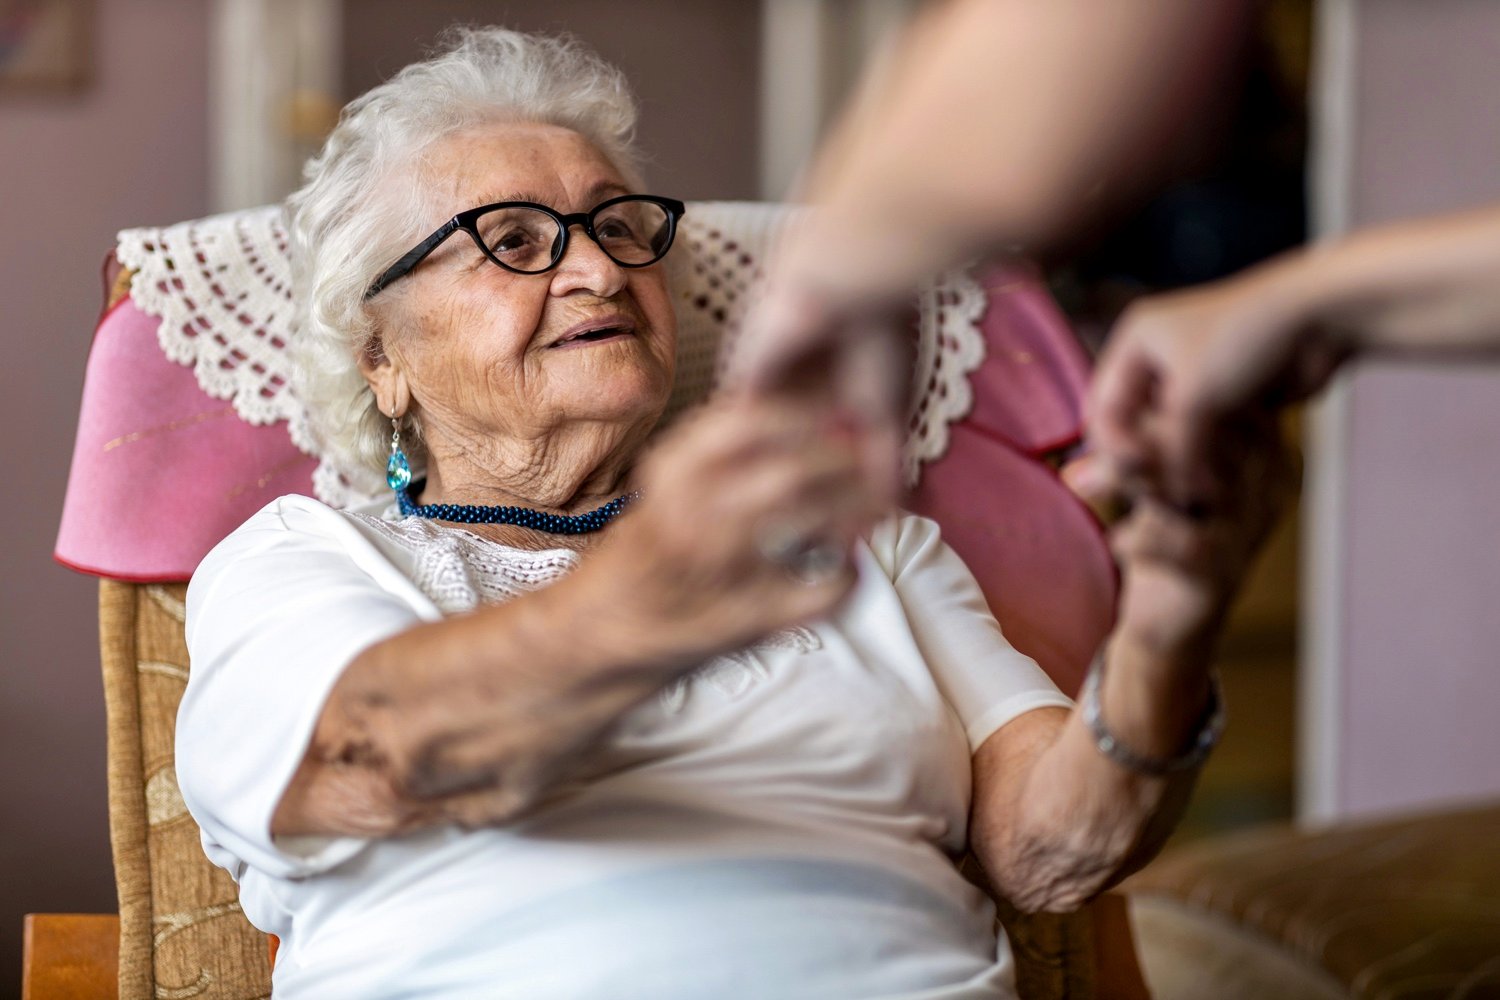 A seated senior woman looking up at a caregiver who is holding her hands